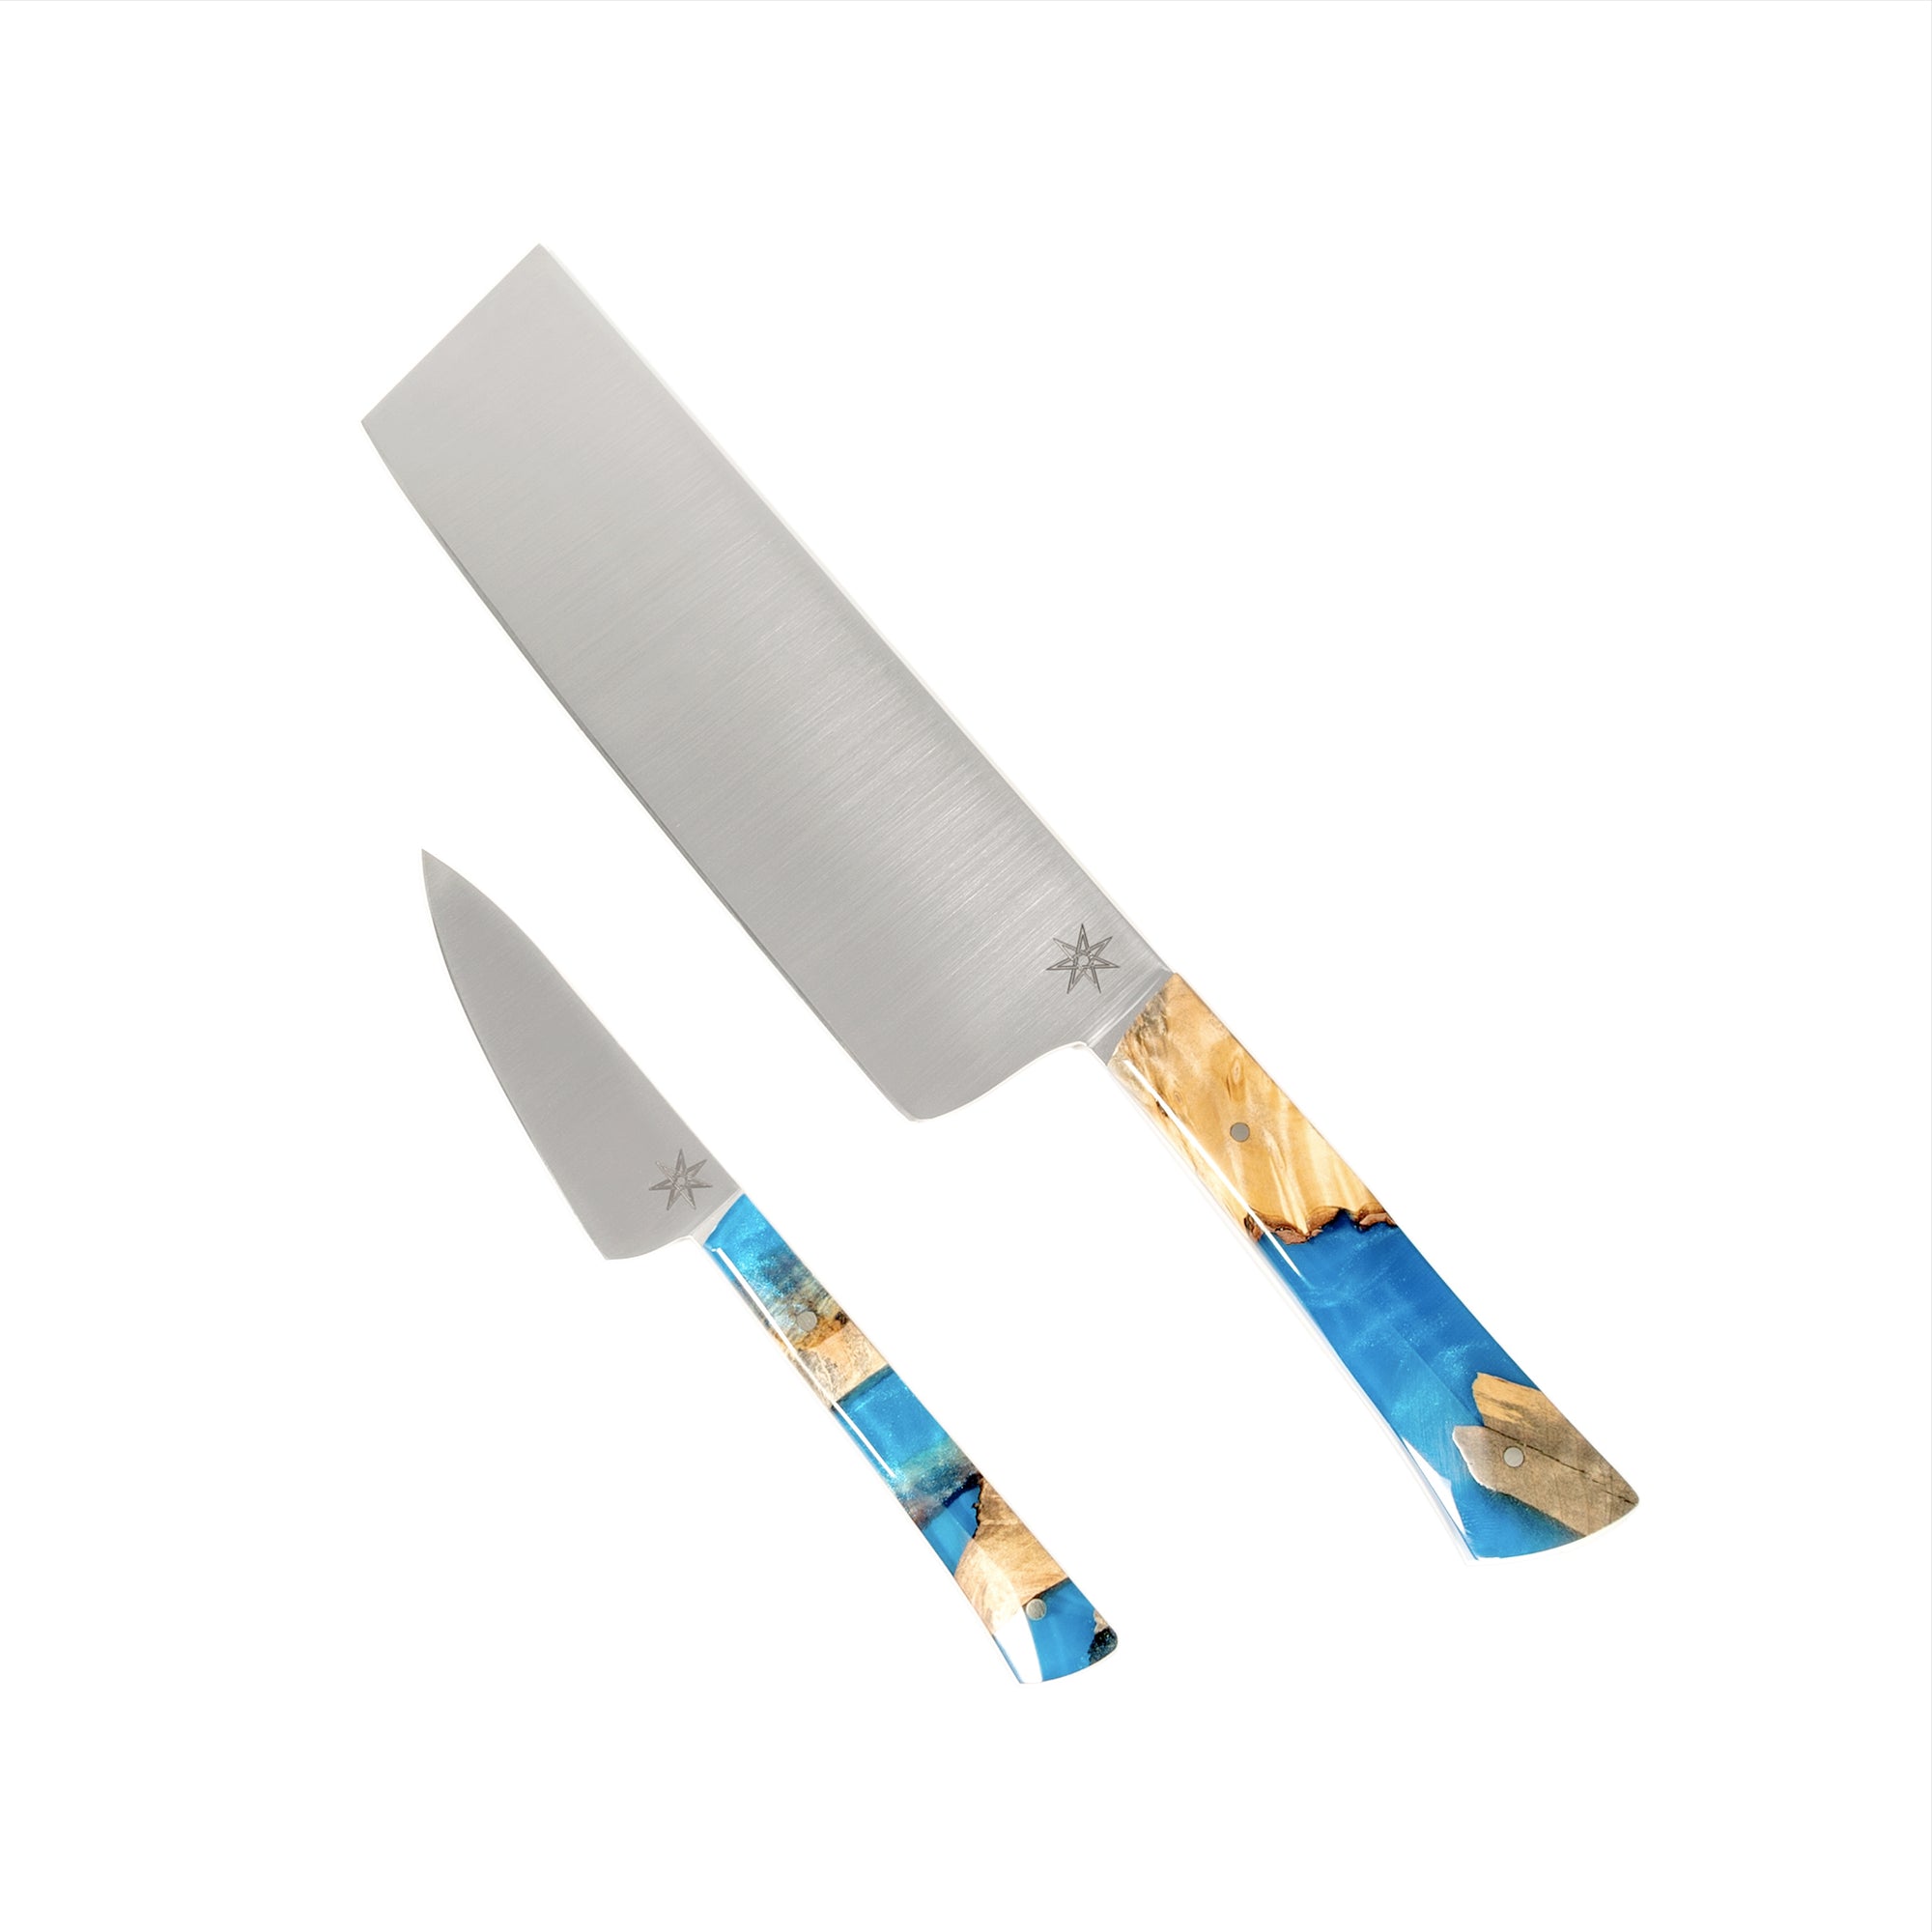 Town Cutler Tahoe Bliss Entremet kitchen knife set with paring and nakiri knives.